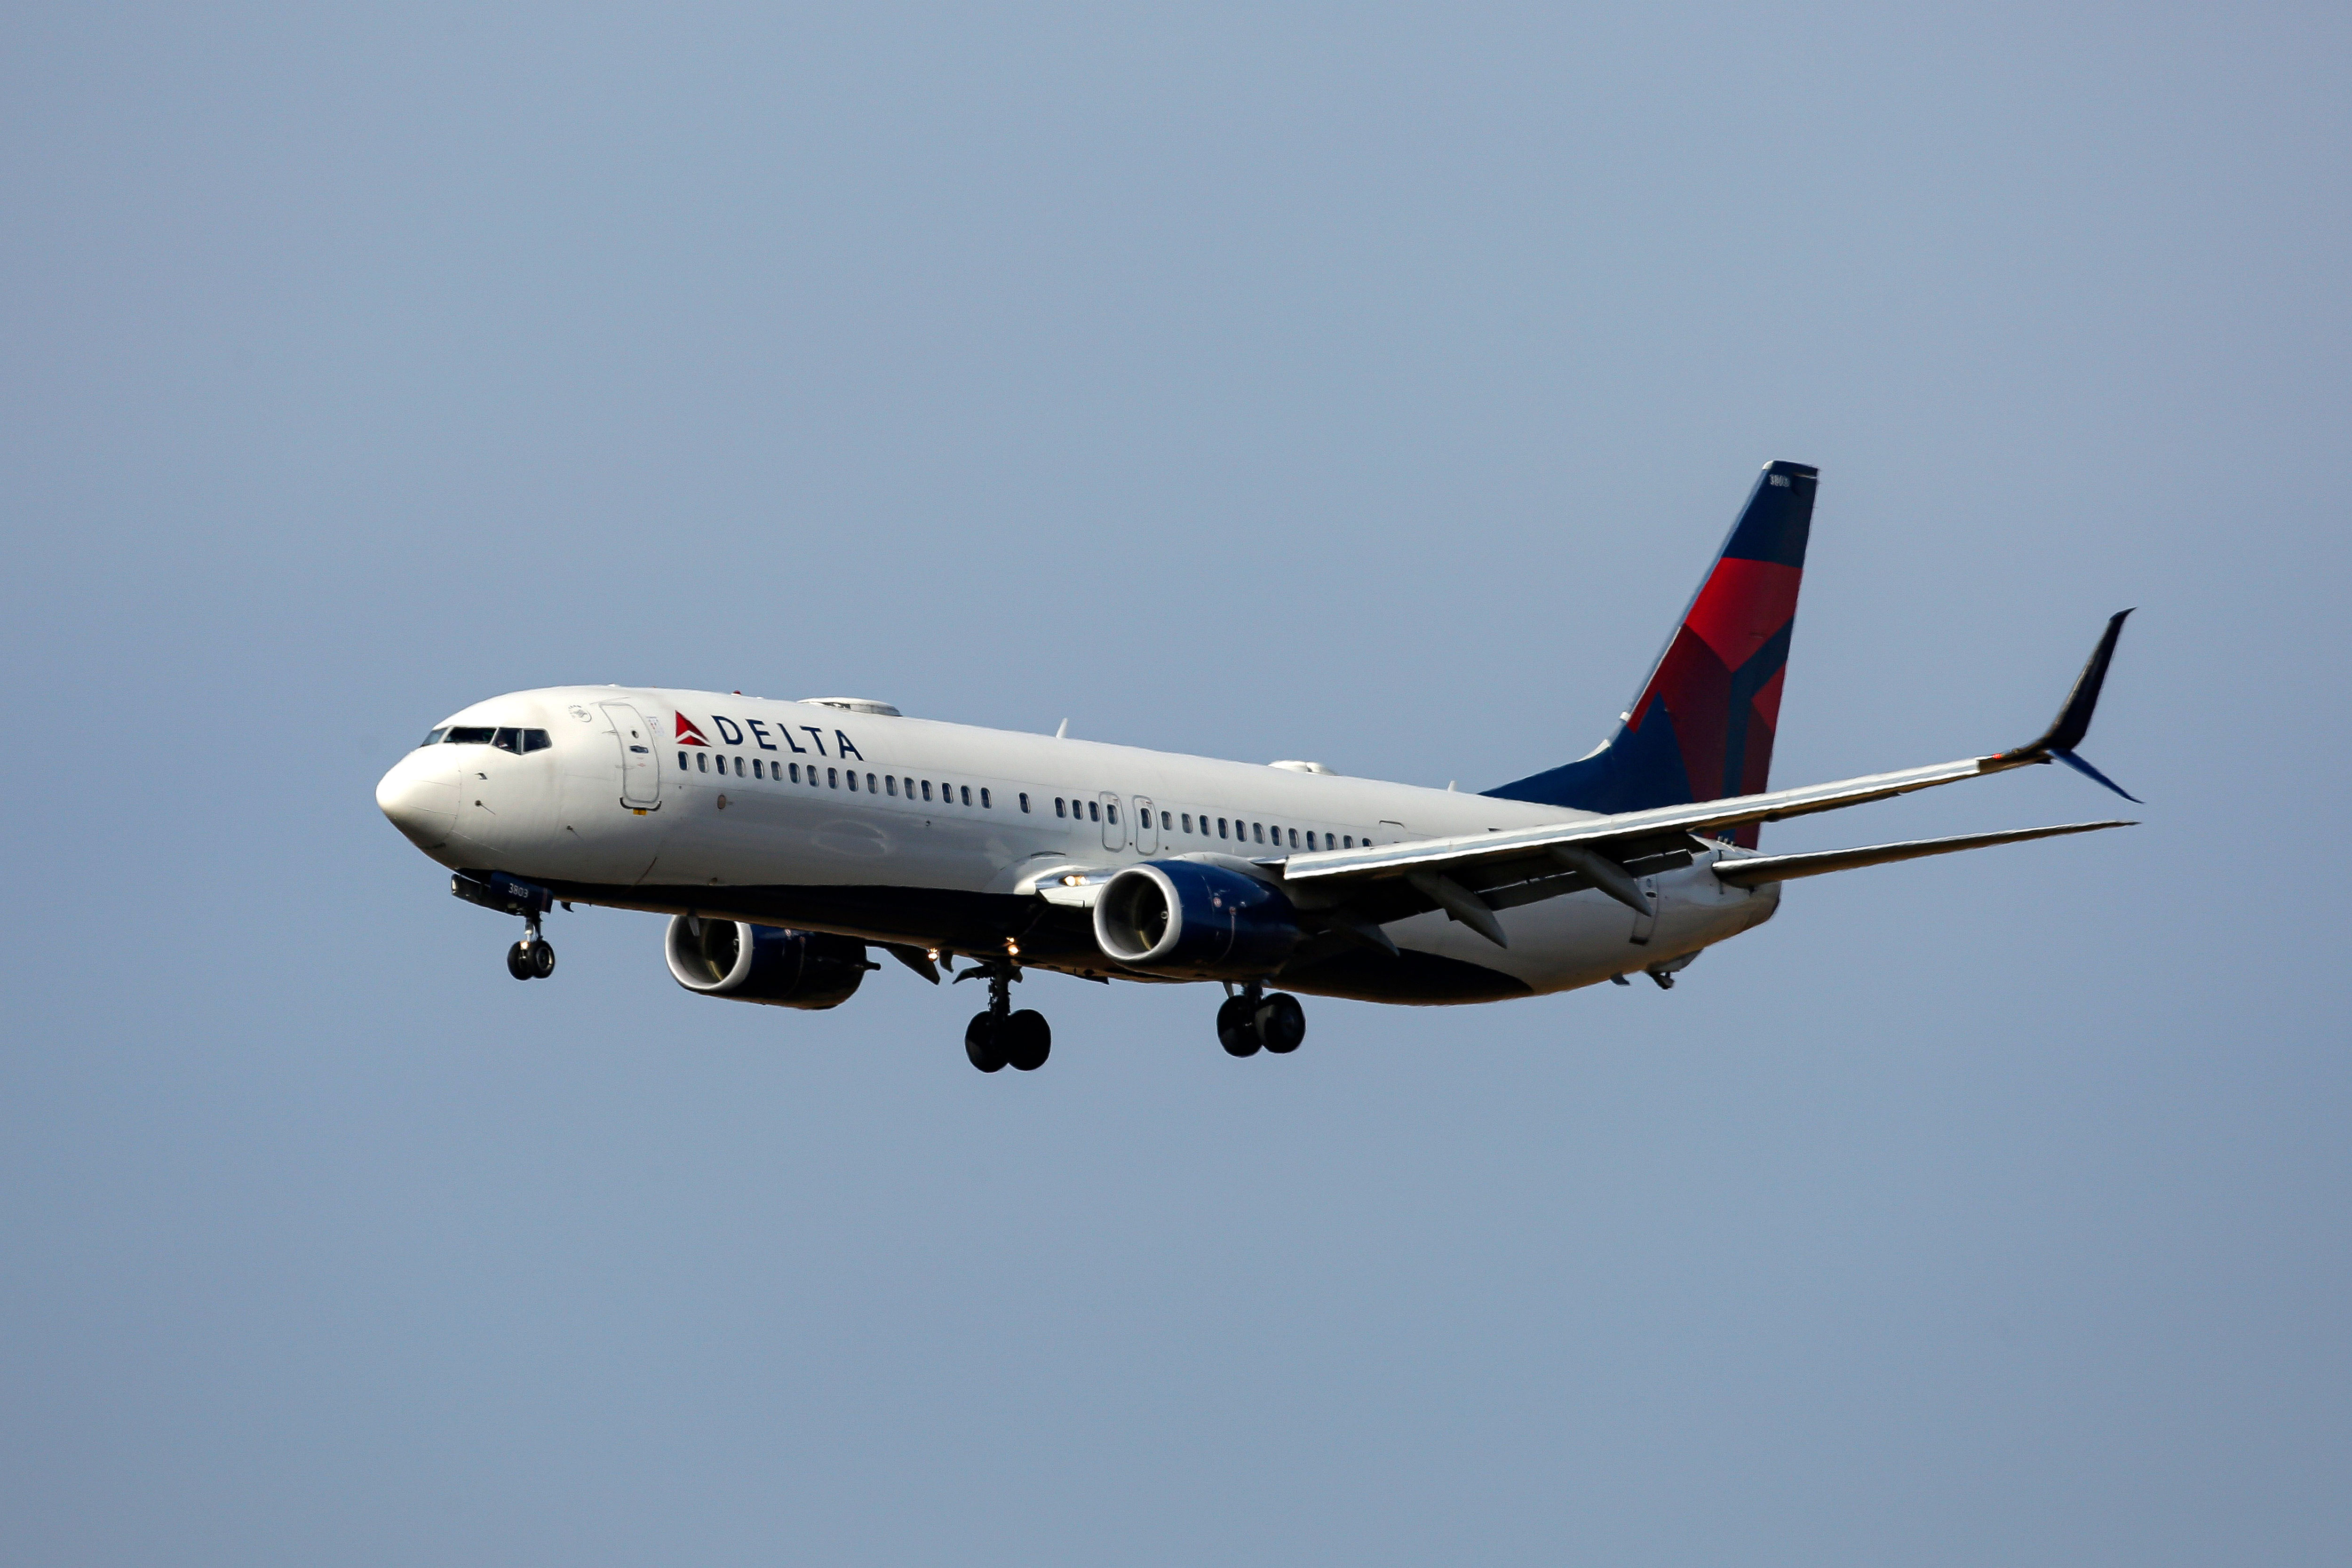 A Delta Air Lines plane lands at John F. Kennedy International Airport in Queens, New York, on October 19.